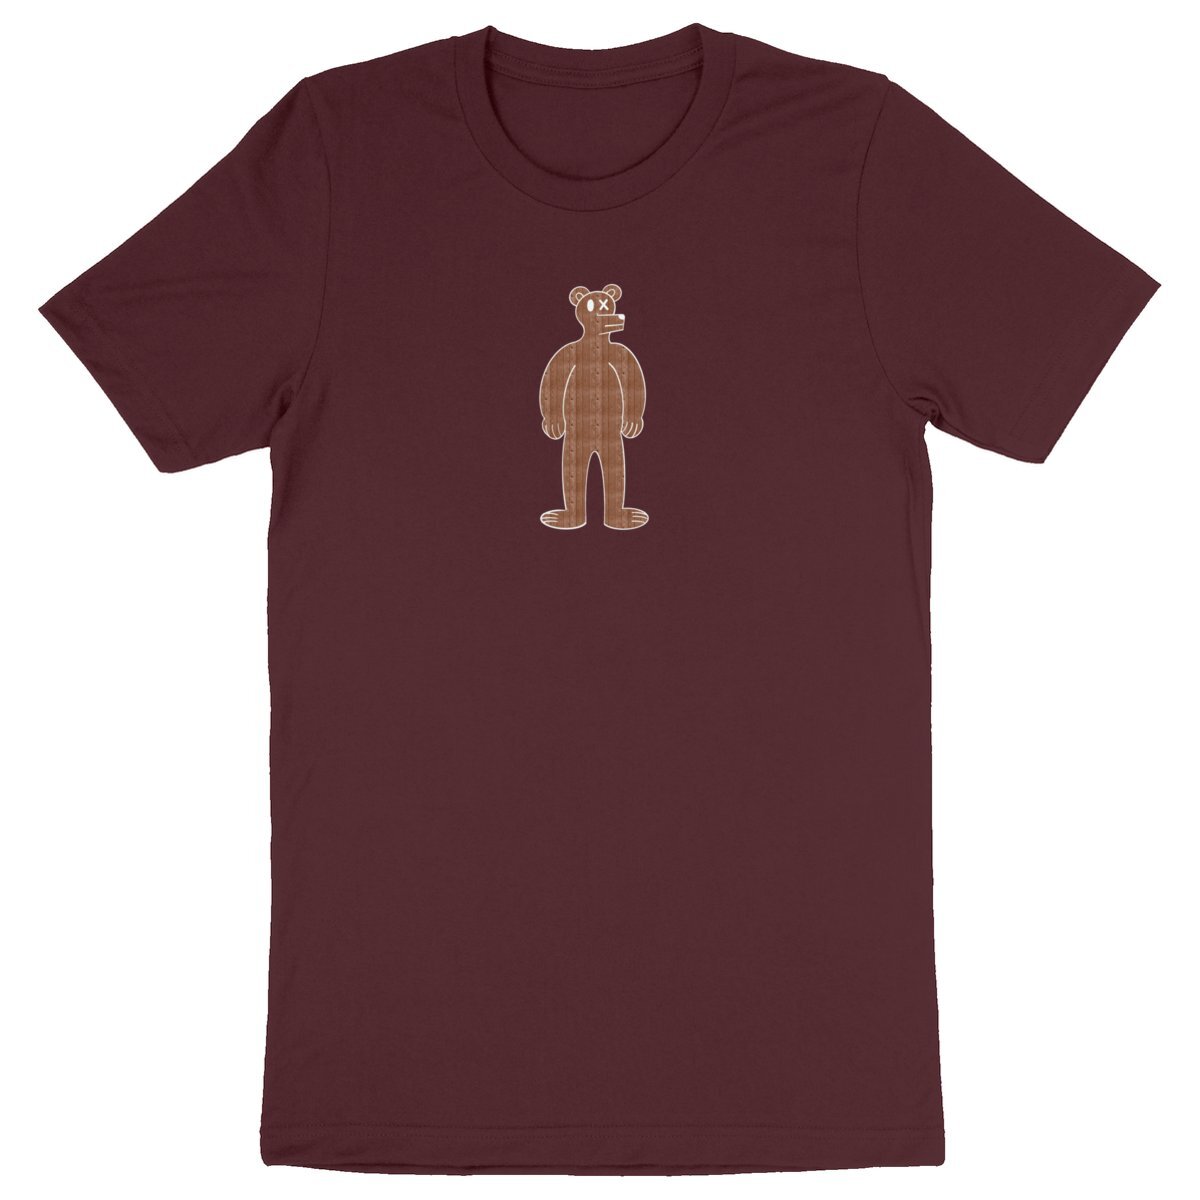 Wooden Bear Graphic Tee